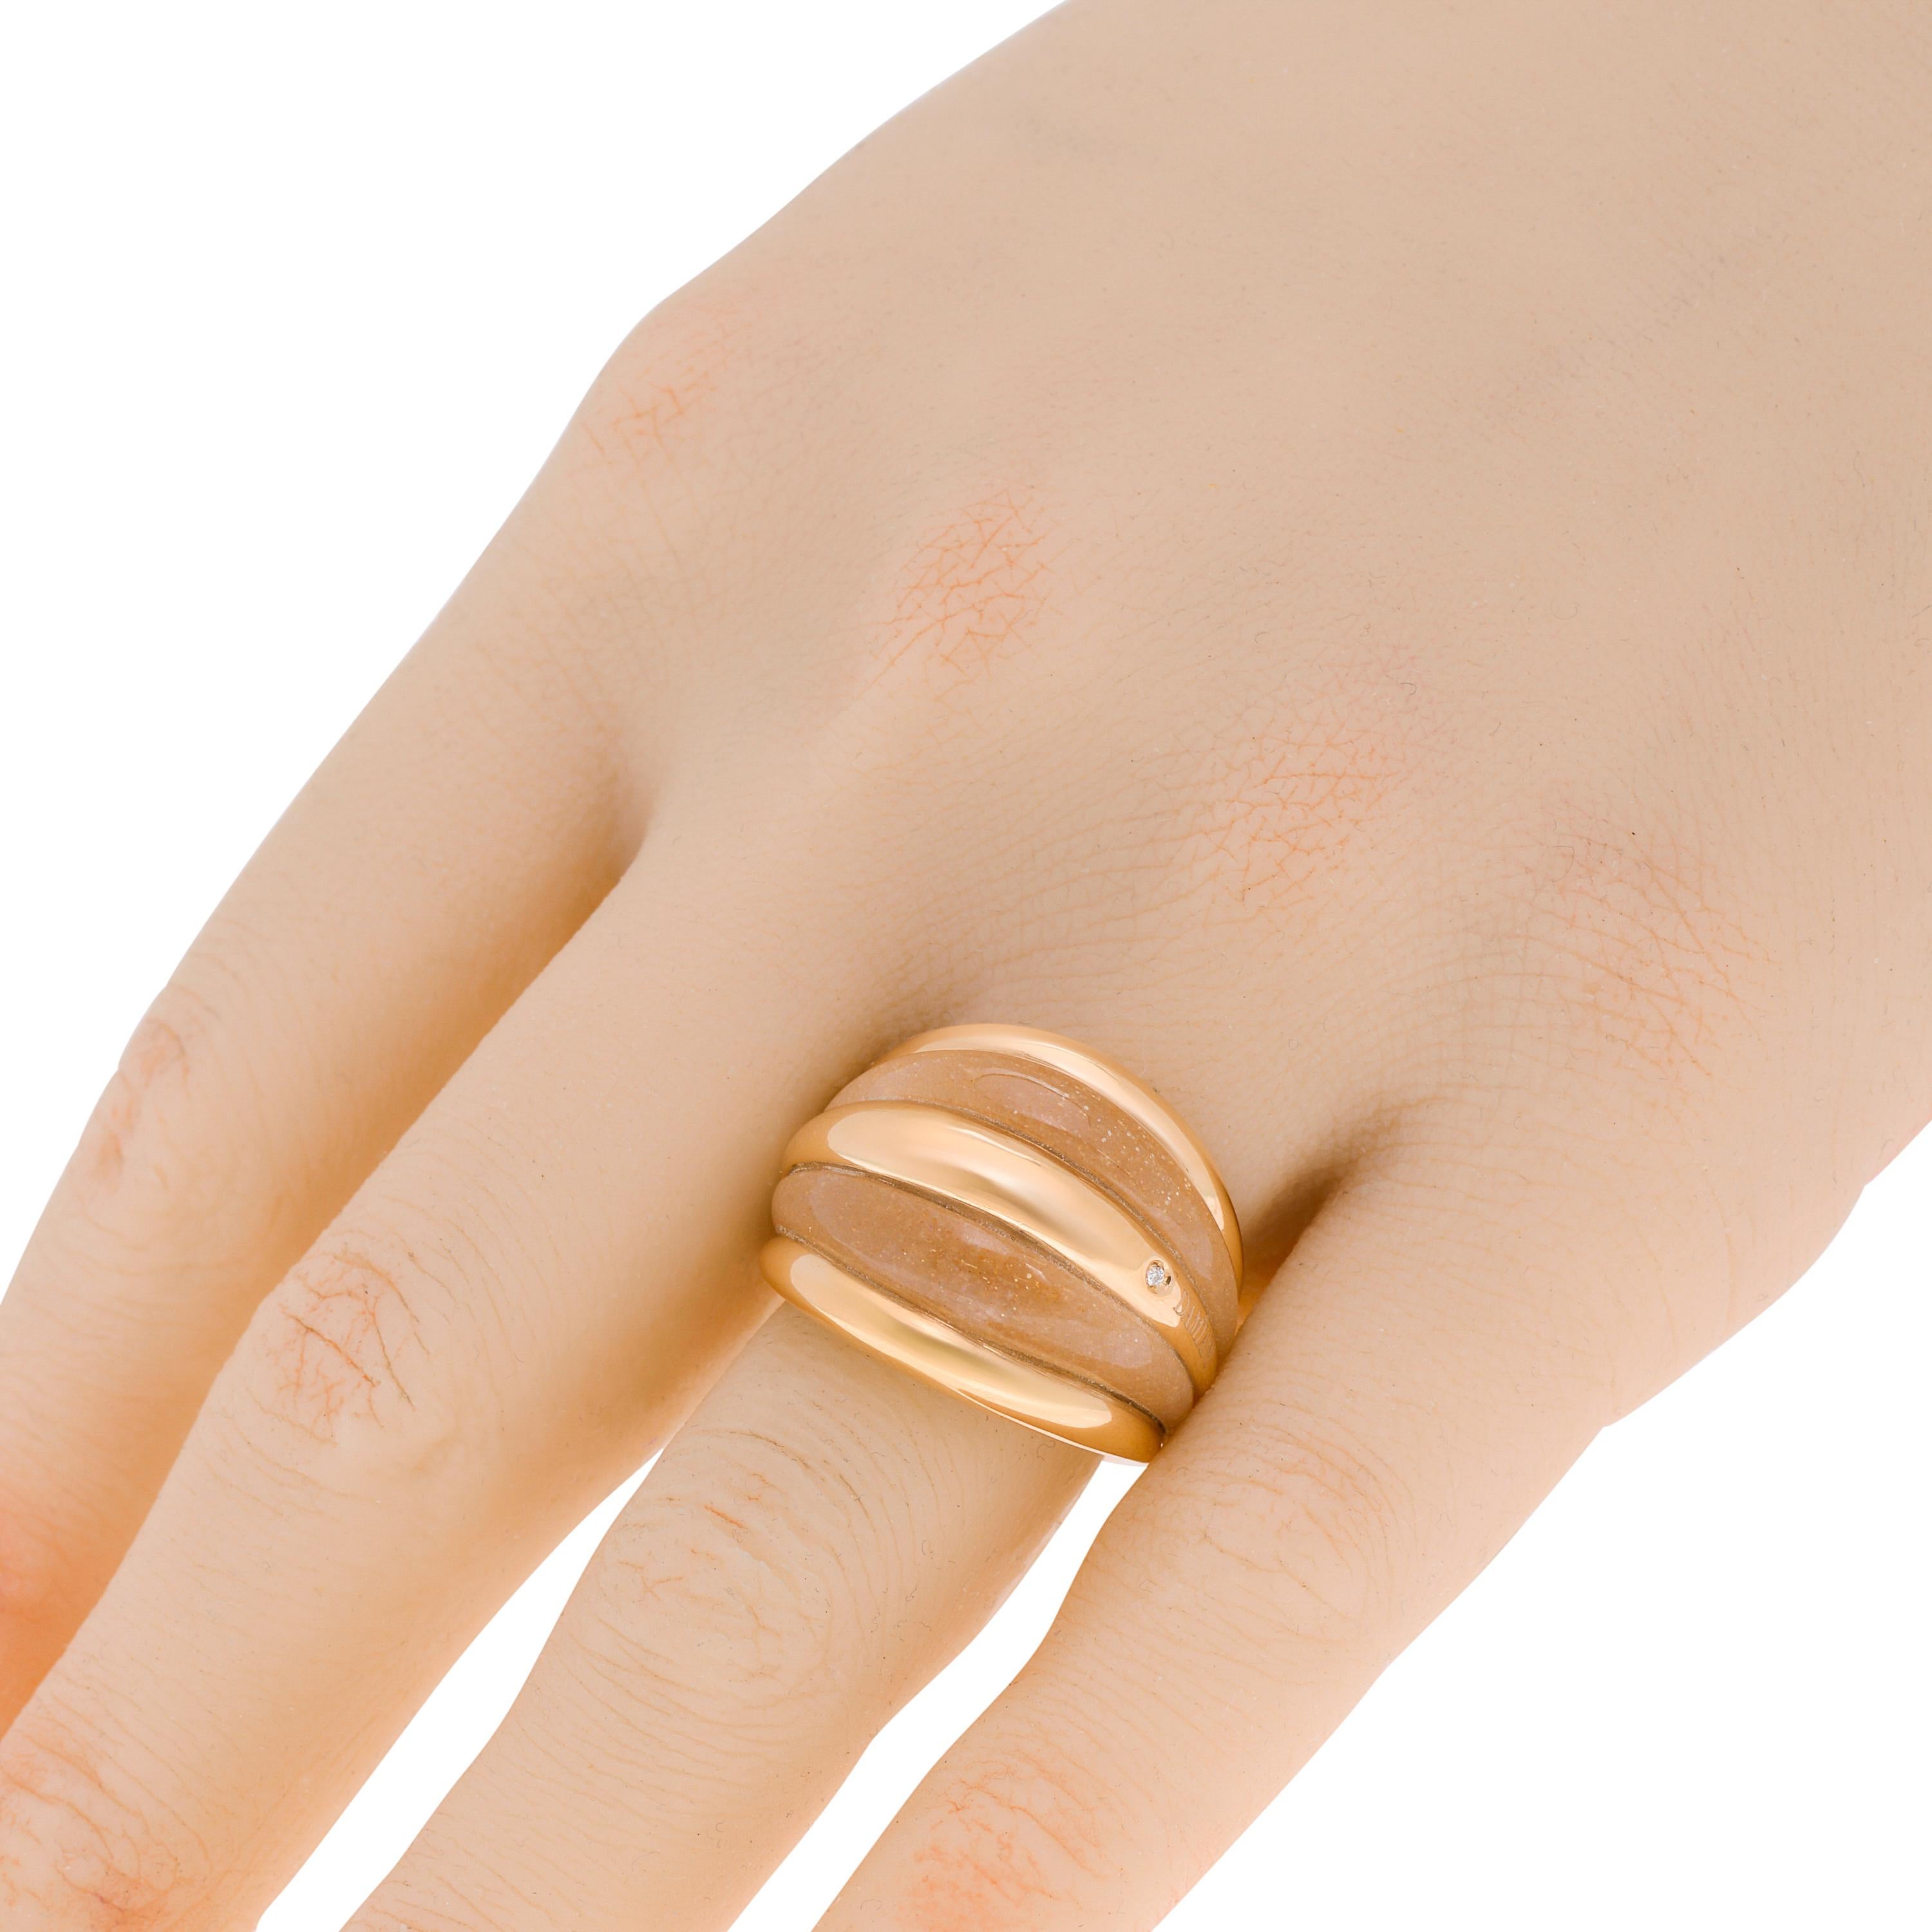 Damiani Dome Ring features tiers of sun stone and polished 18k rose gold with a 0.01ct. tw. diamond accent. The ring size is 5.75 (51.3). The band Width is 6.5mm. The weight is 7.5g.
